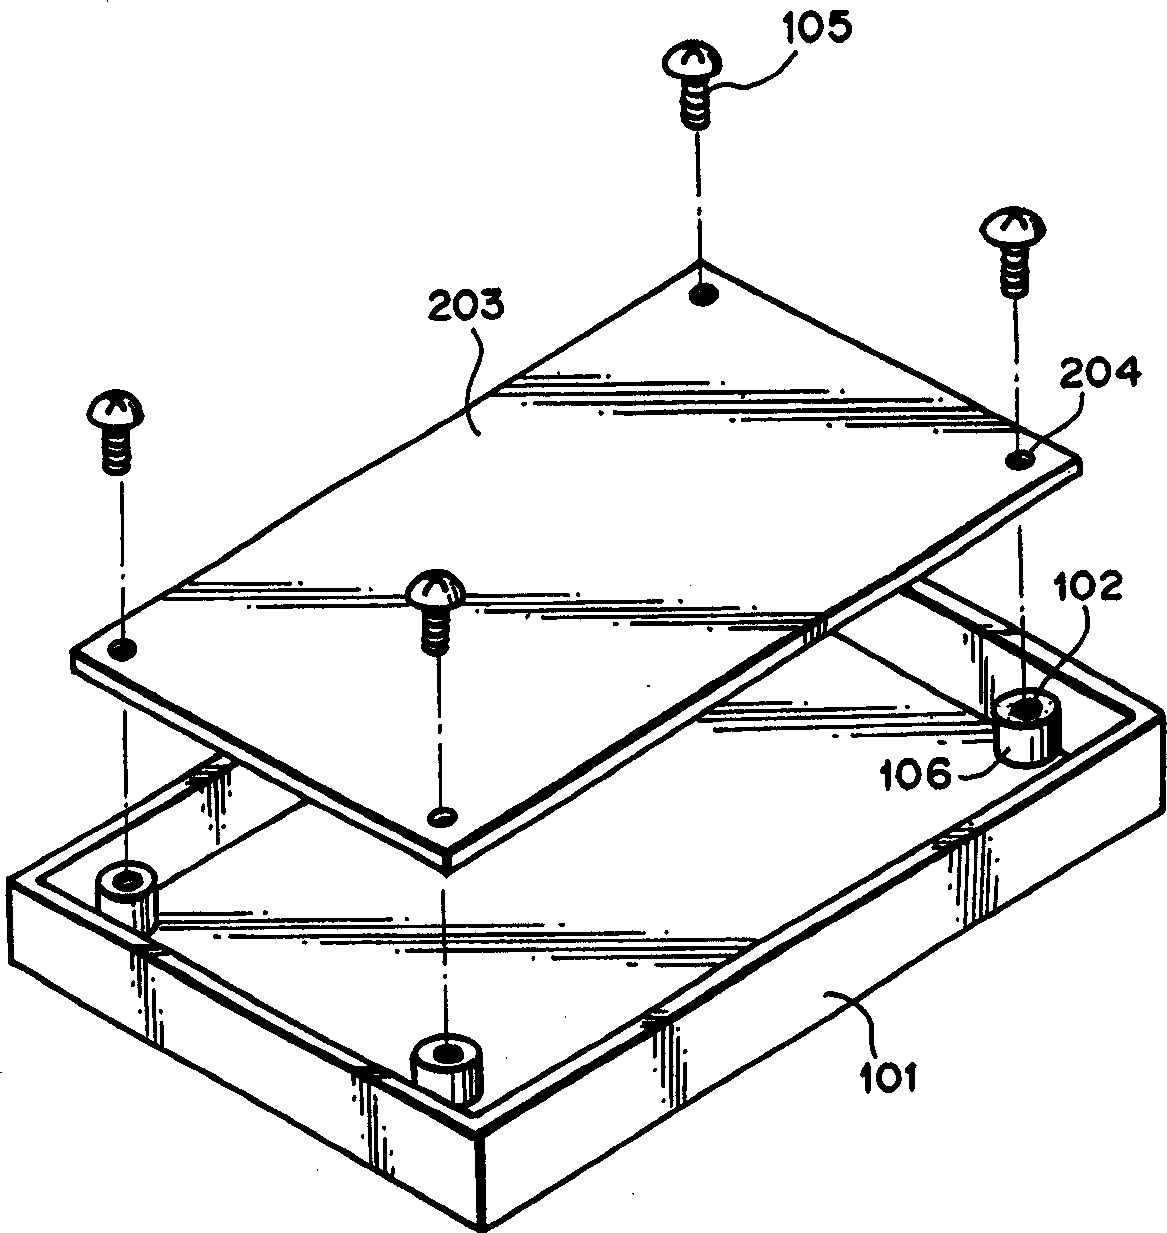 Deformation-resistant installation structure for portable apparatus